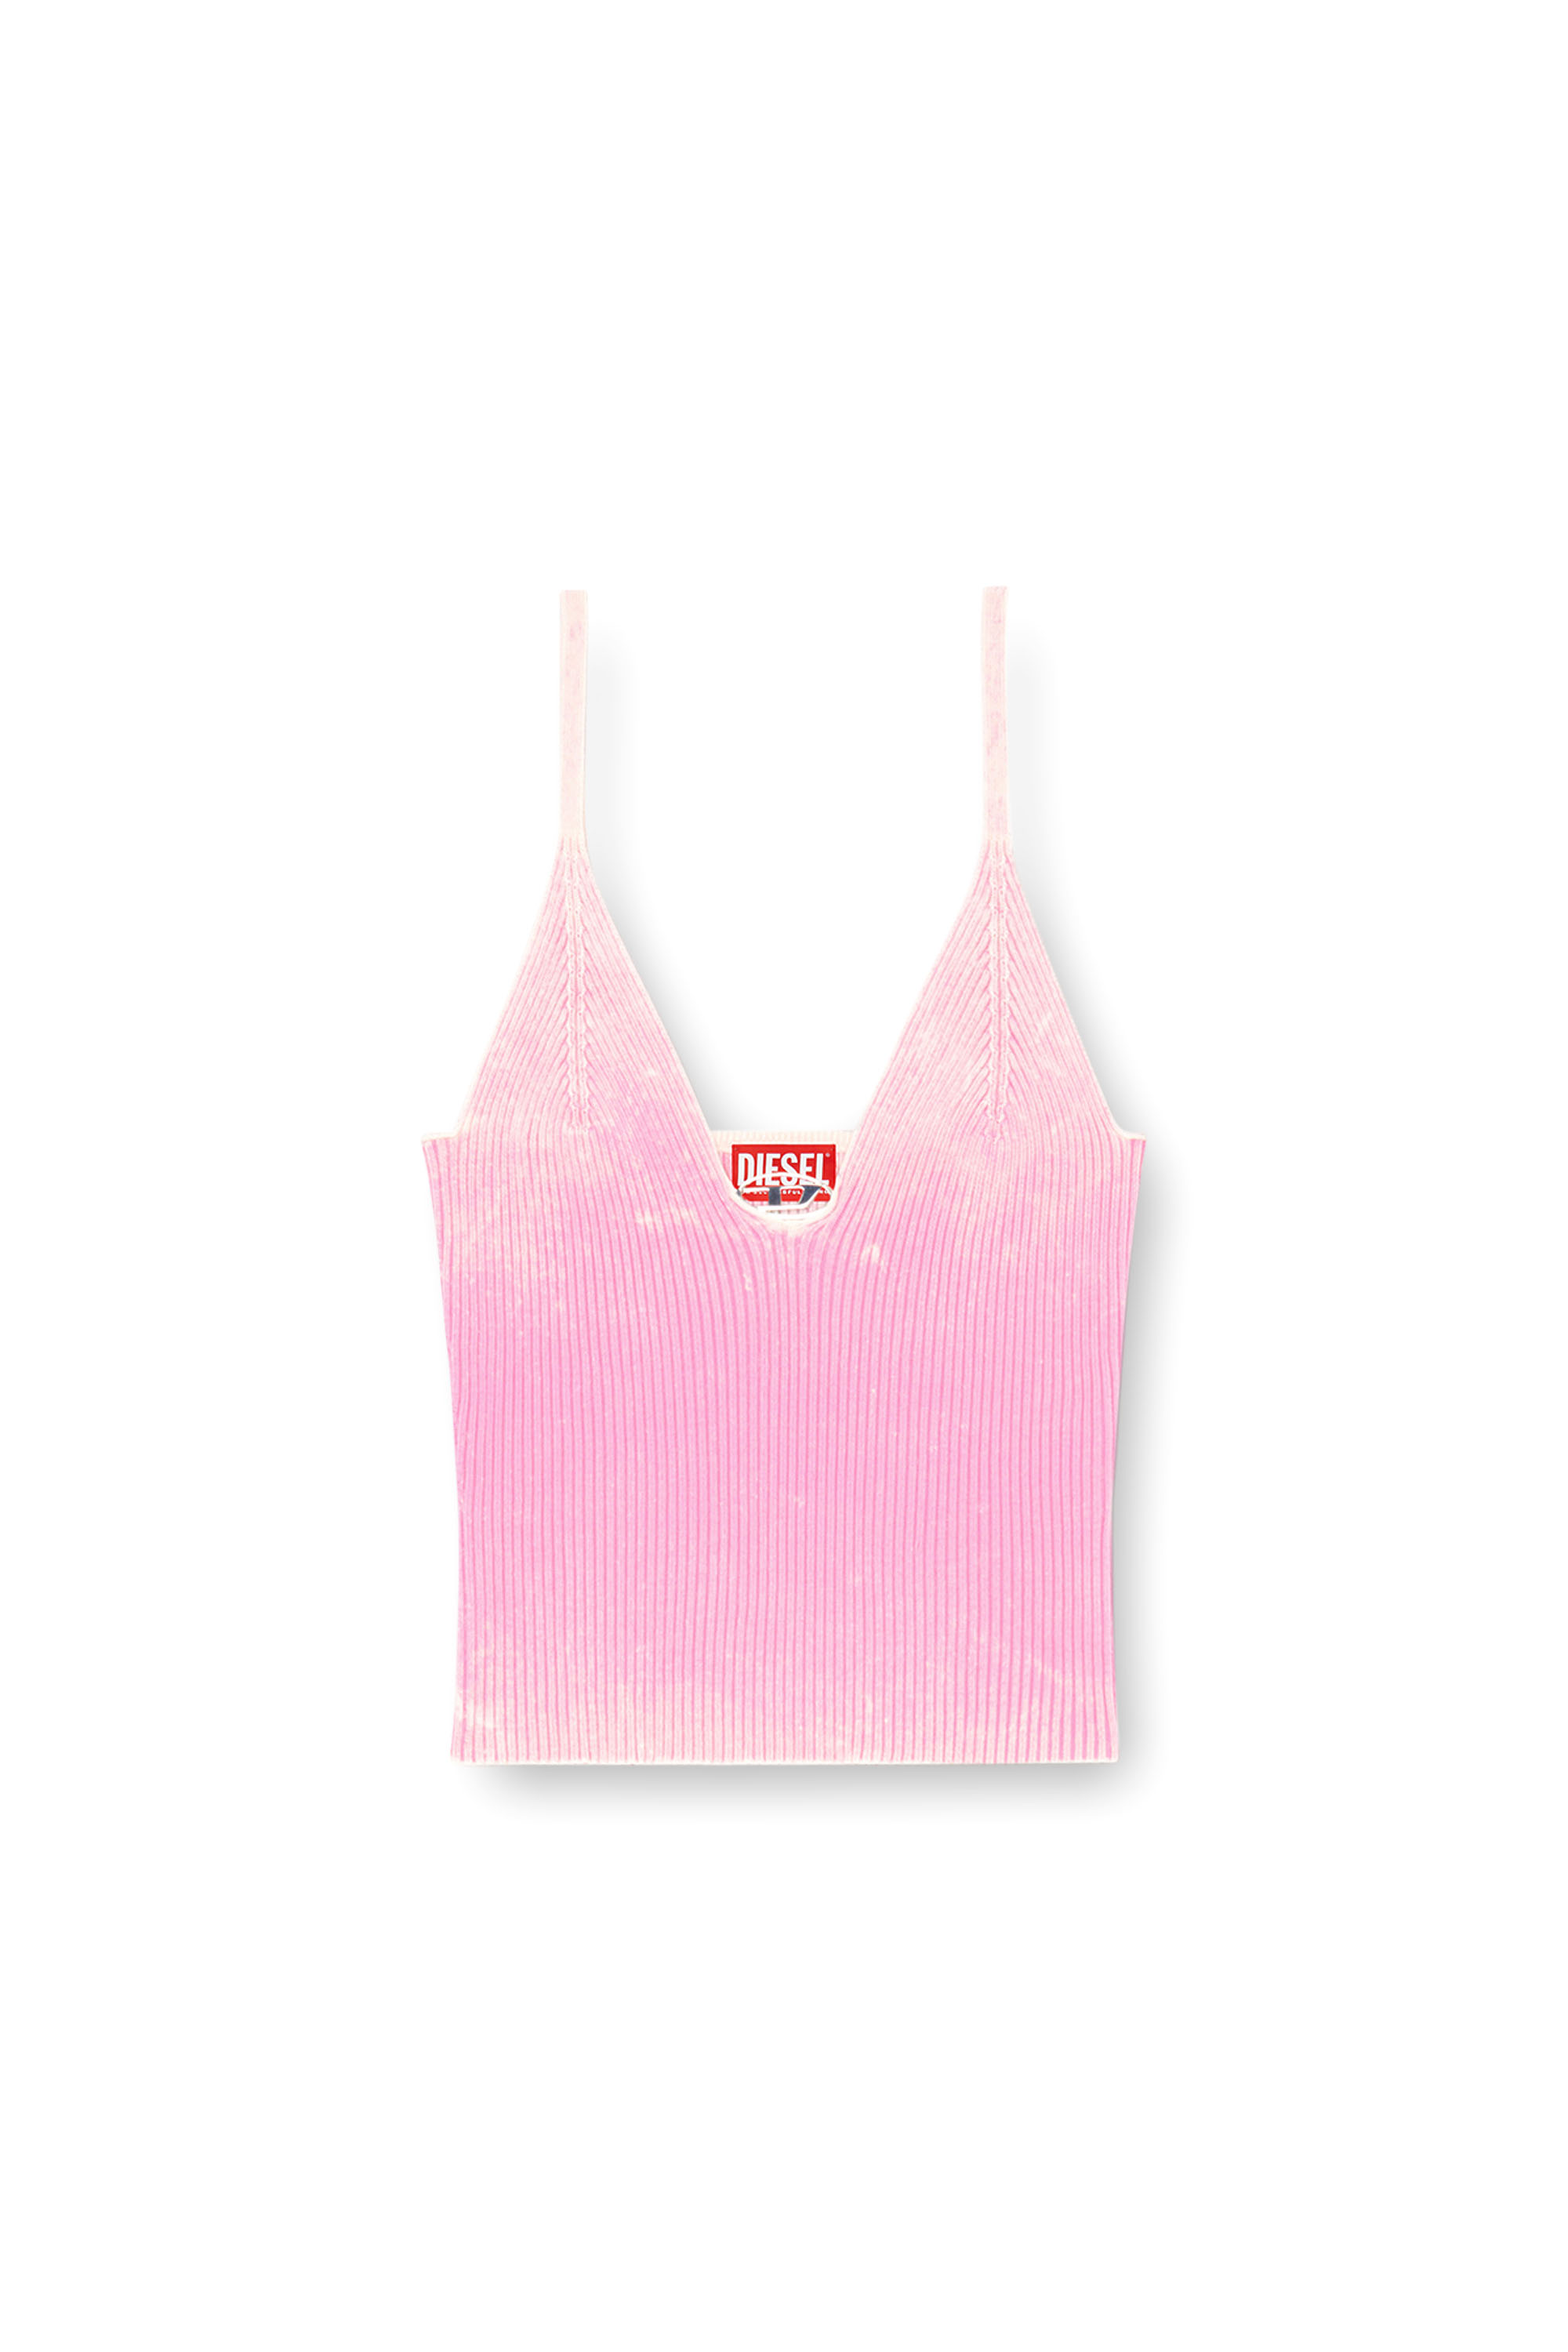 Diesel - M-LAILA, Female Camisole in faded ribbed knit in ピンク - Image 5